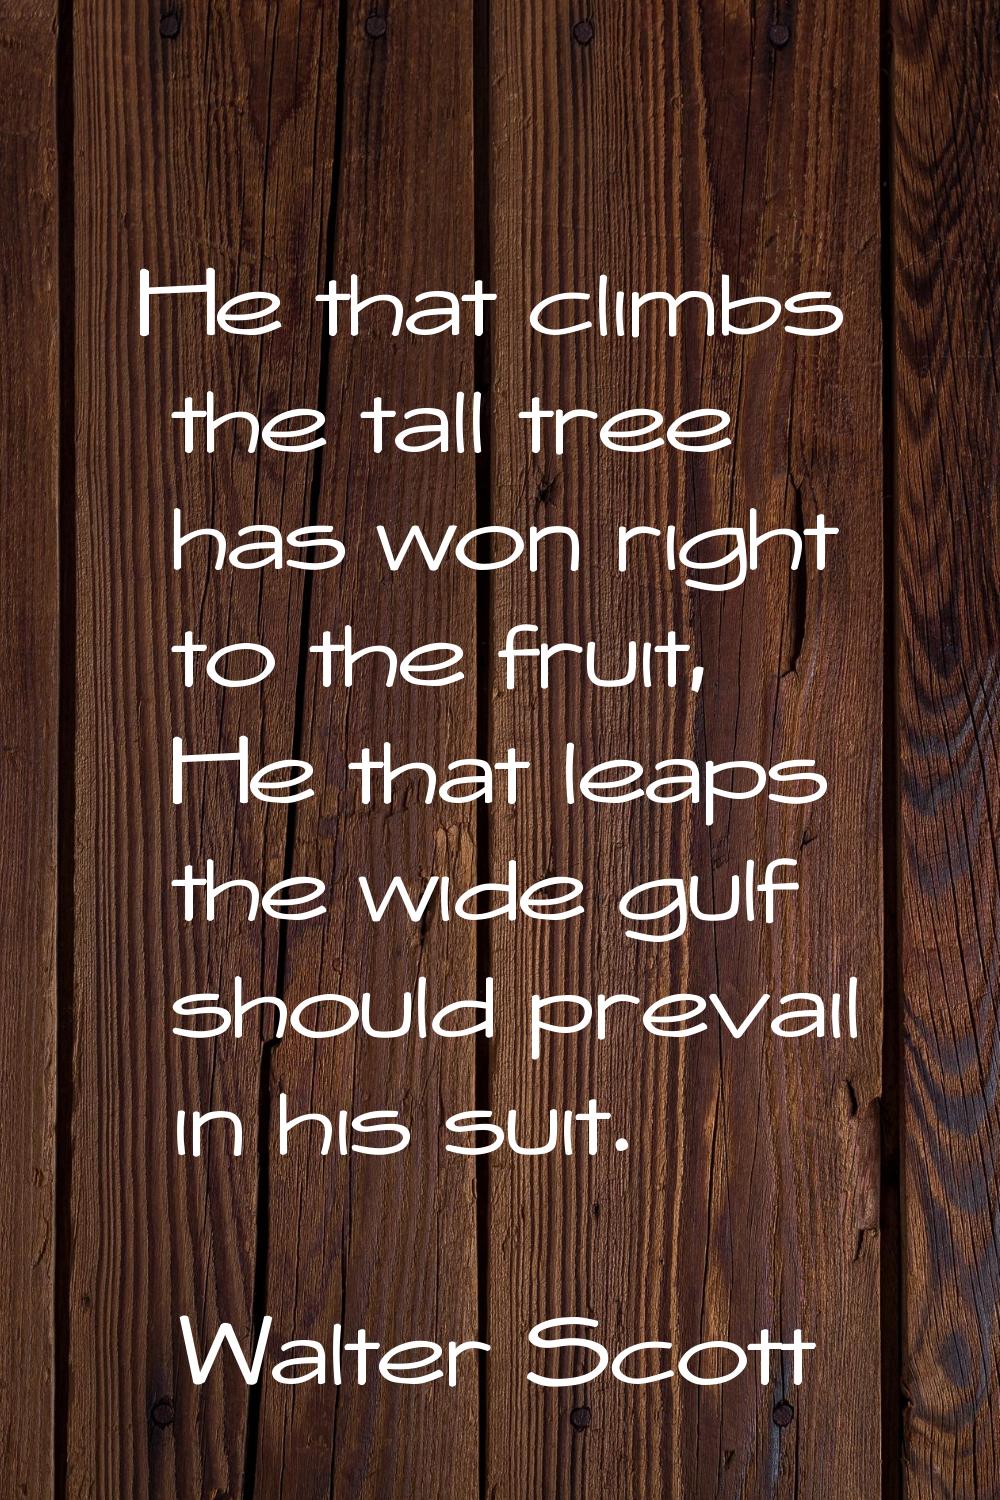 He that climbs the tall tree has won right to the fruit, He that leaps the wide gulf should prevail